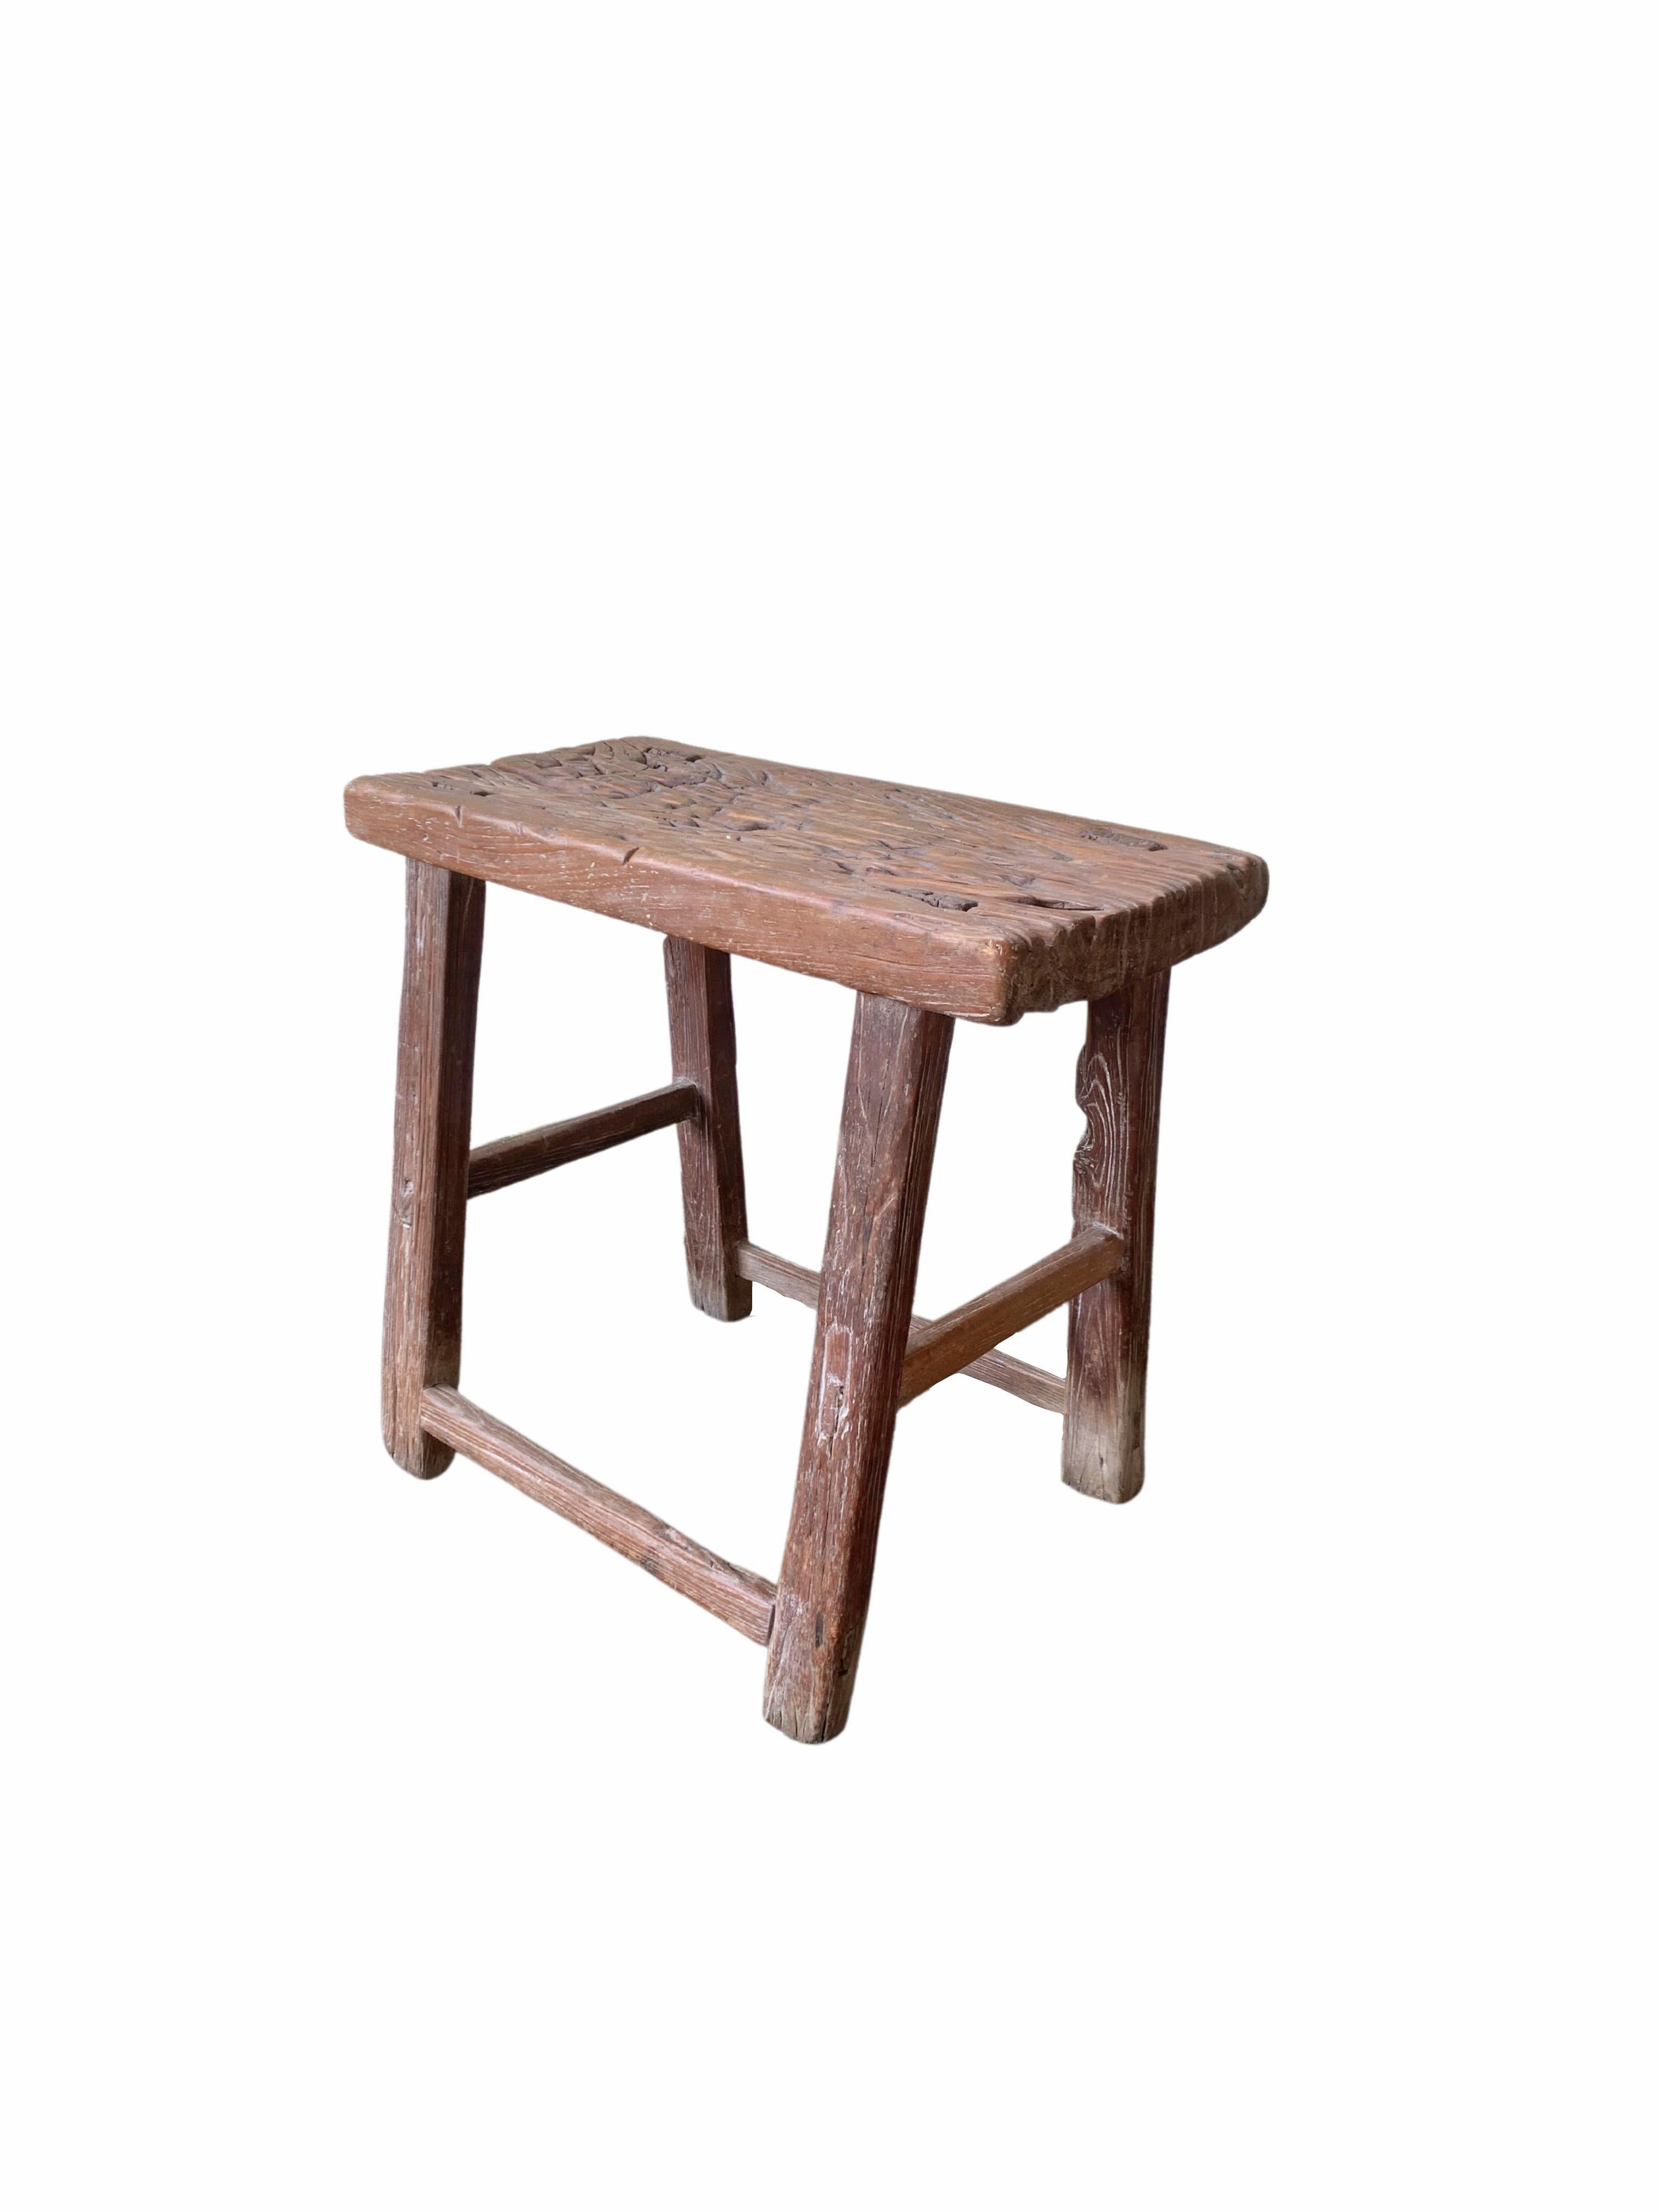 This antique elm wood stool comes from China's Hubei province. It was crafted using only wooden joints. The elm wood has aged beautifully over its more than 100 years of life. 


 